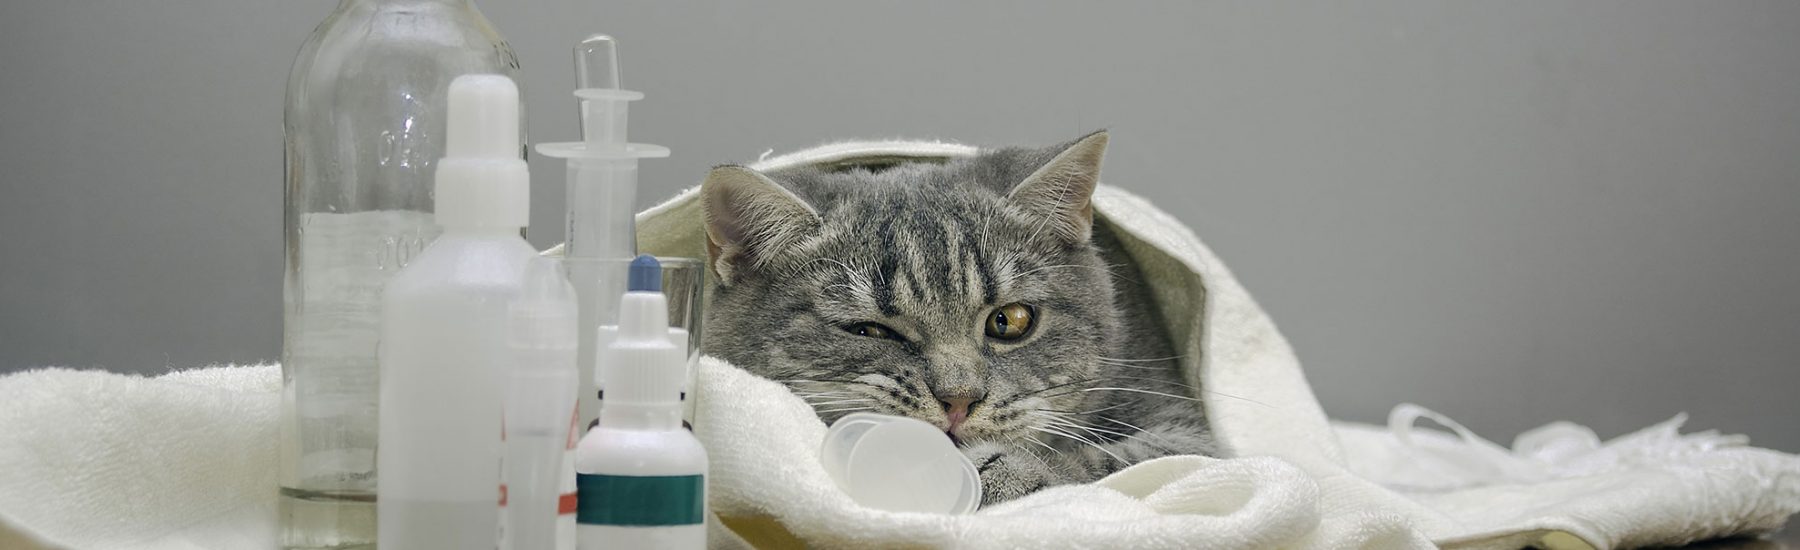 Cat covered in a towel and lying down next to a syringe and containers